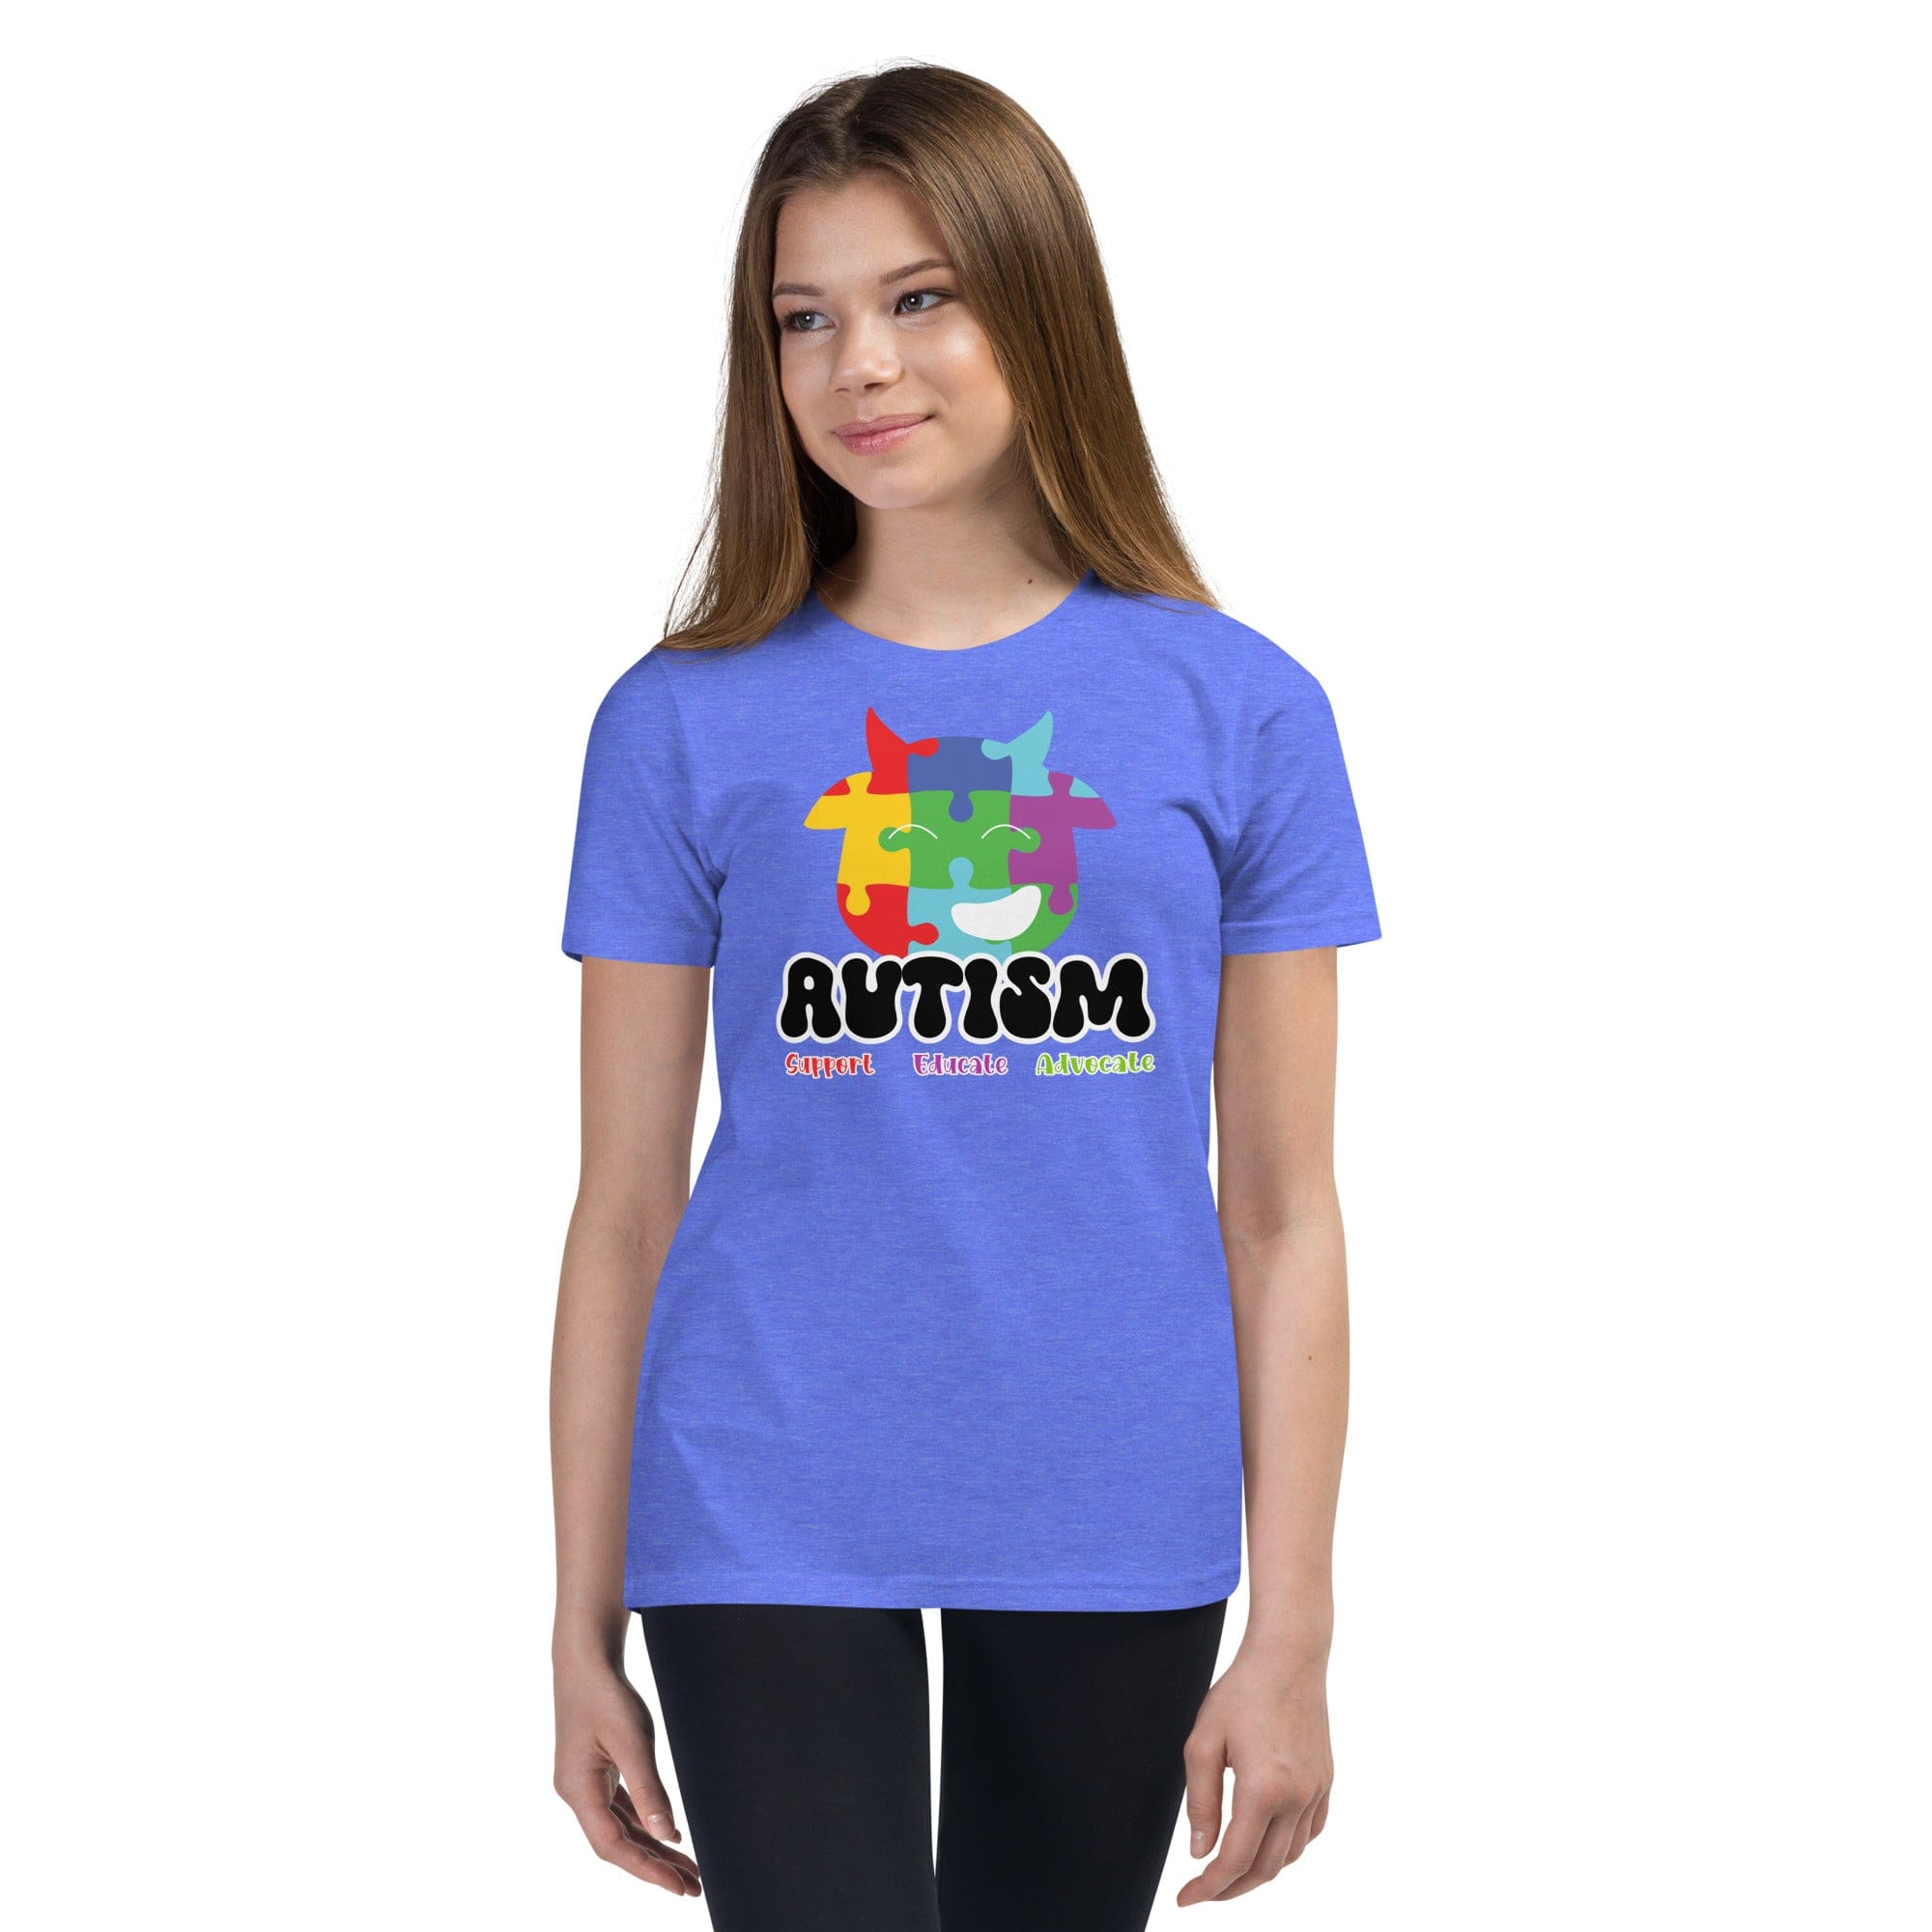 Autism Advocate Youth Graphic Tees - Kicks Shoelaces